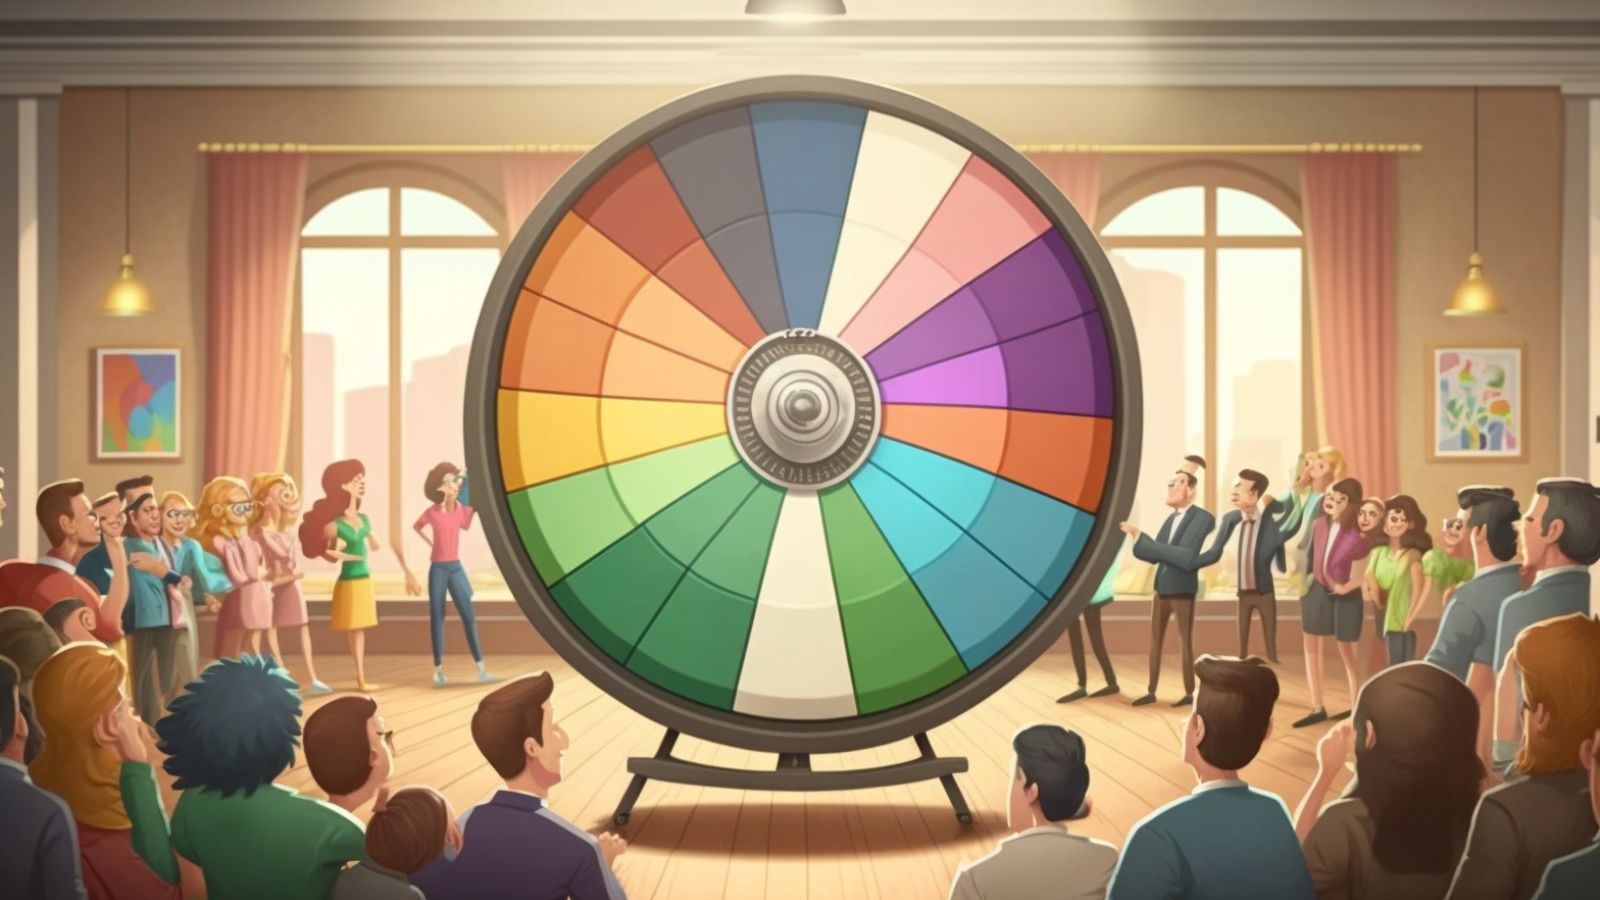 Spin a wheel to choose survey, sweepstakes, and other winners